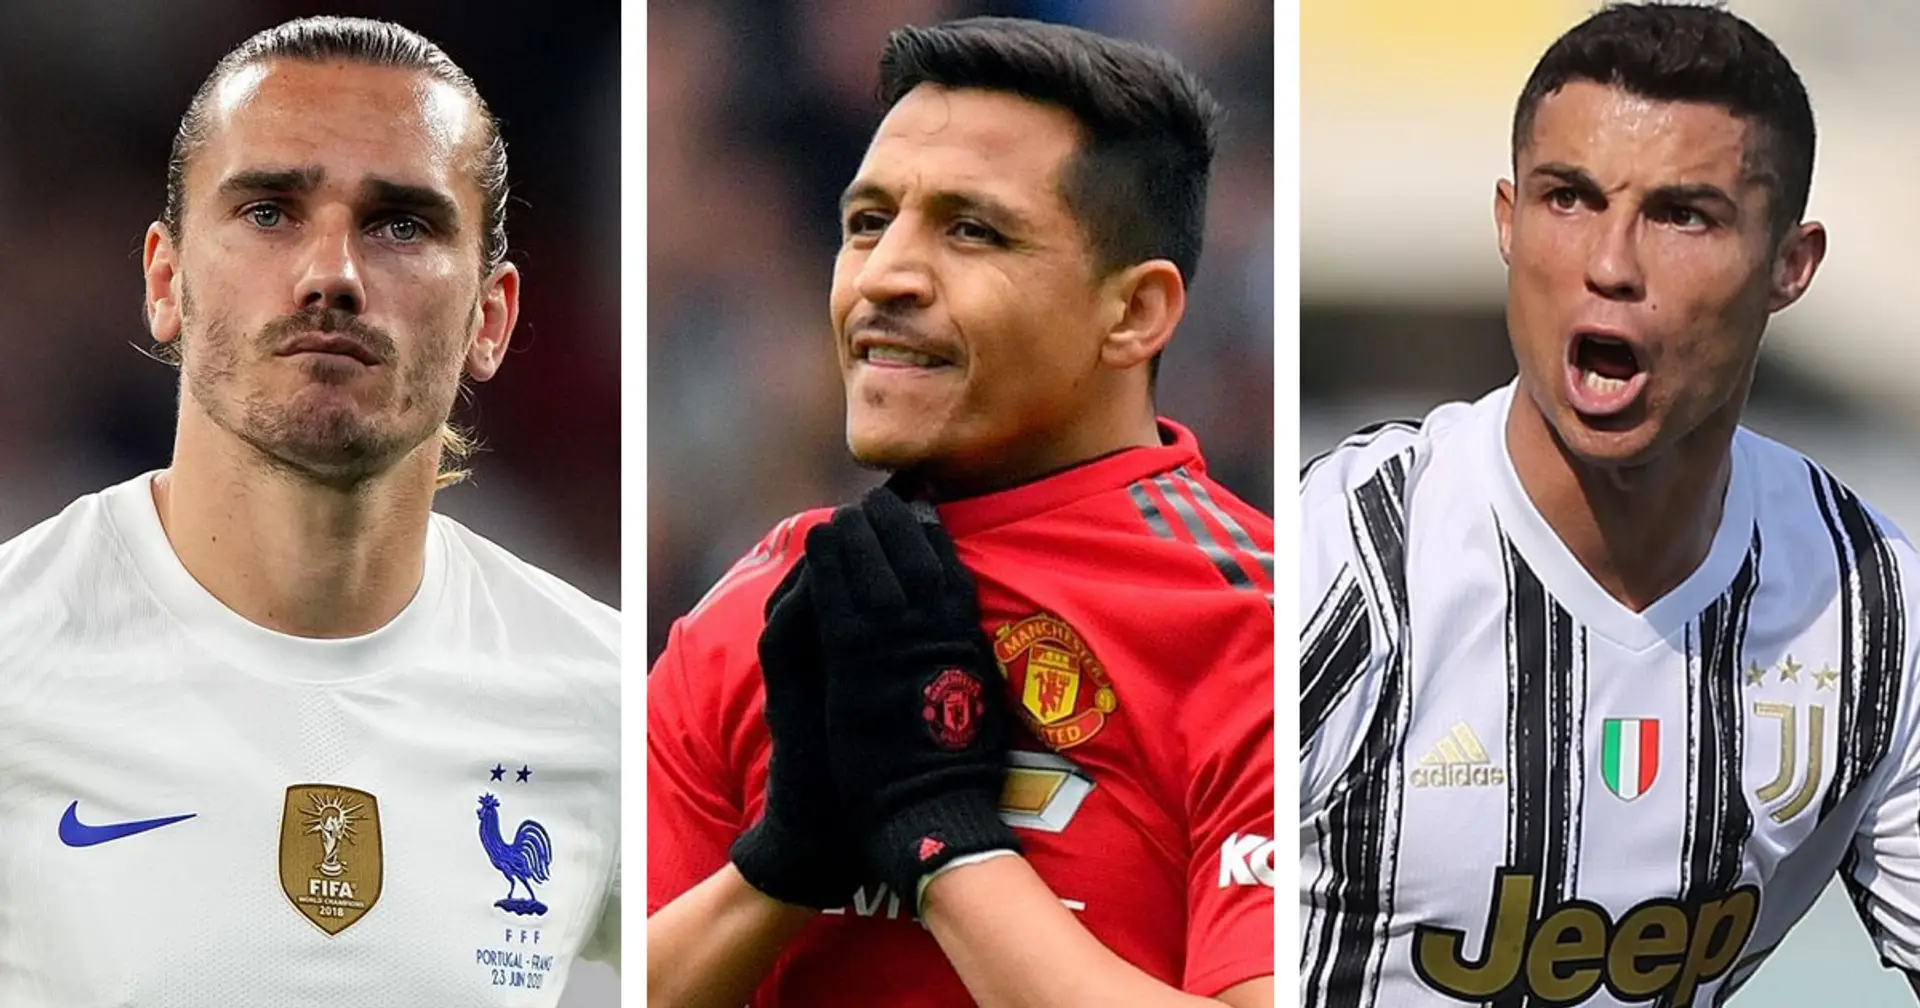 5 Man United rumoured targets who could rank high on 'Sanchez meter' – and should be avoided